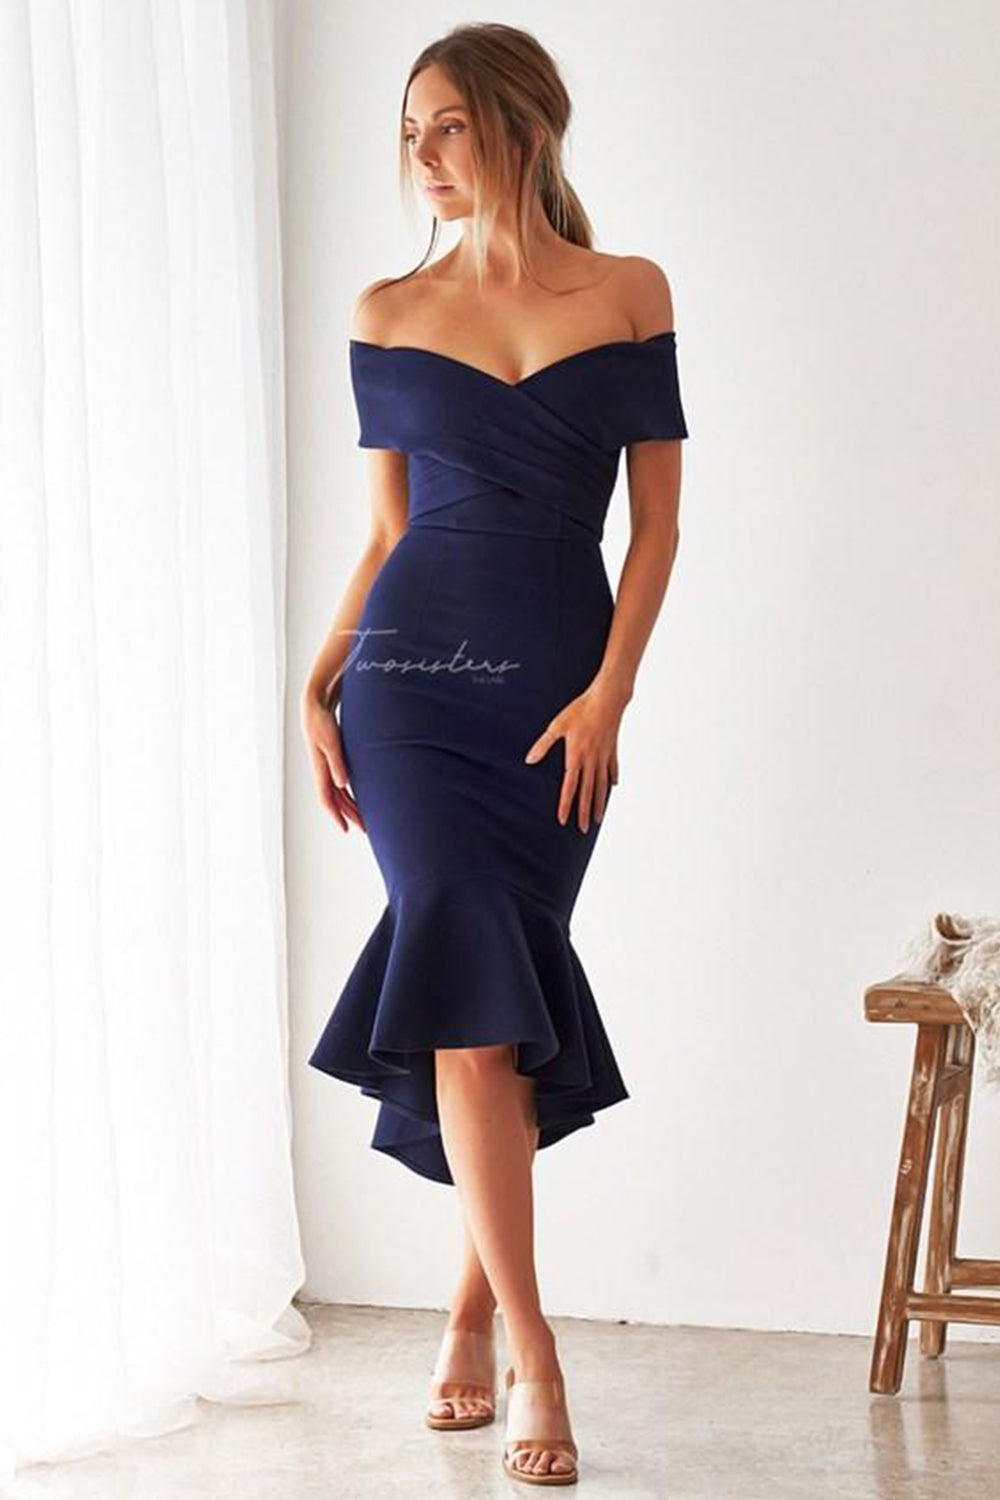 Brienne Dress by Twosisters - Navy